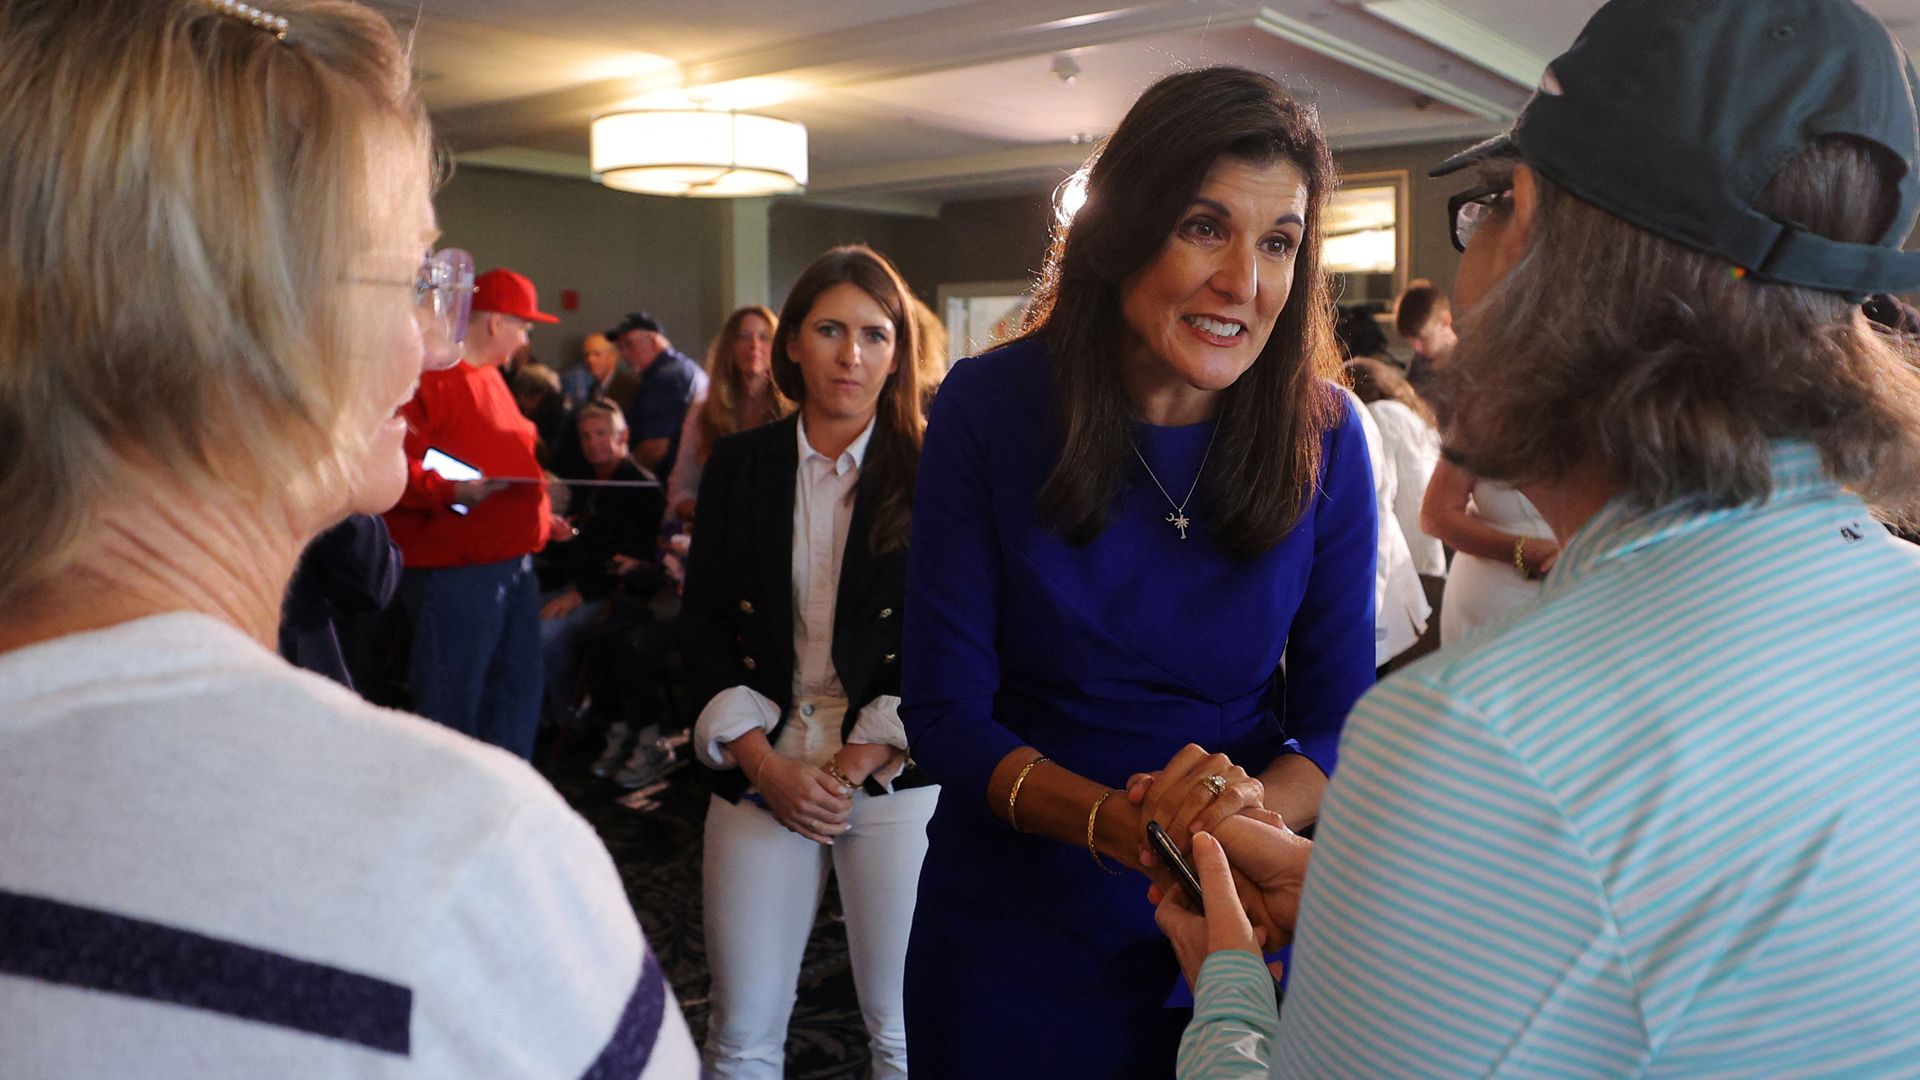 Nikki Haley is poised as a backup if Trump is unable to finish his presidential run, but it's unclear if MAGA voters would endorse her.